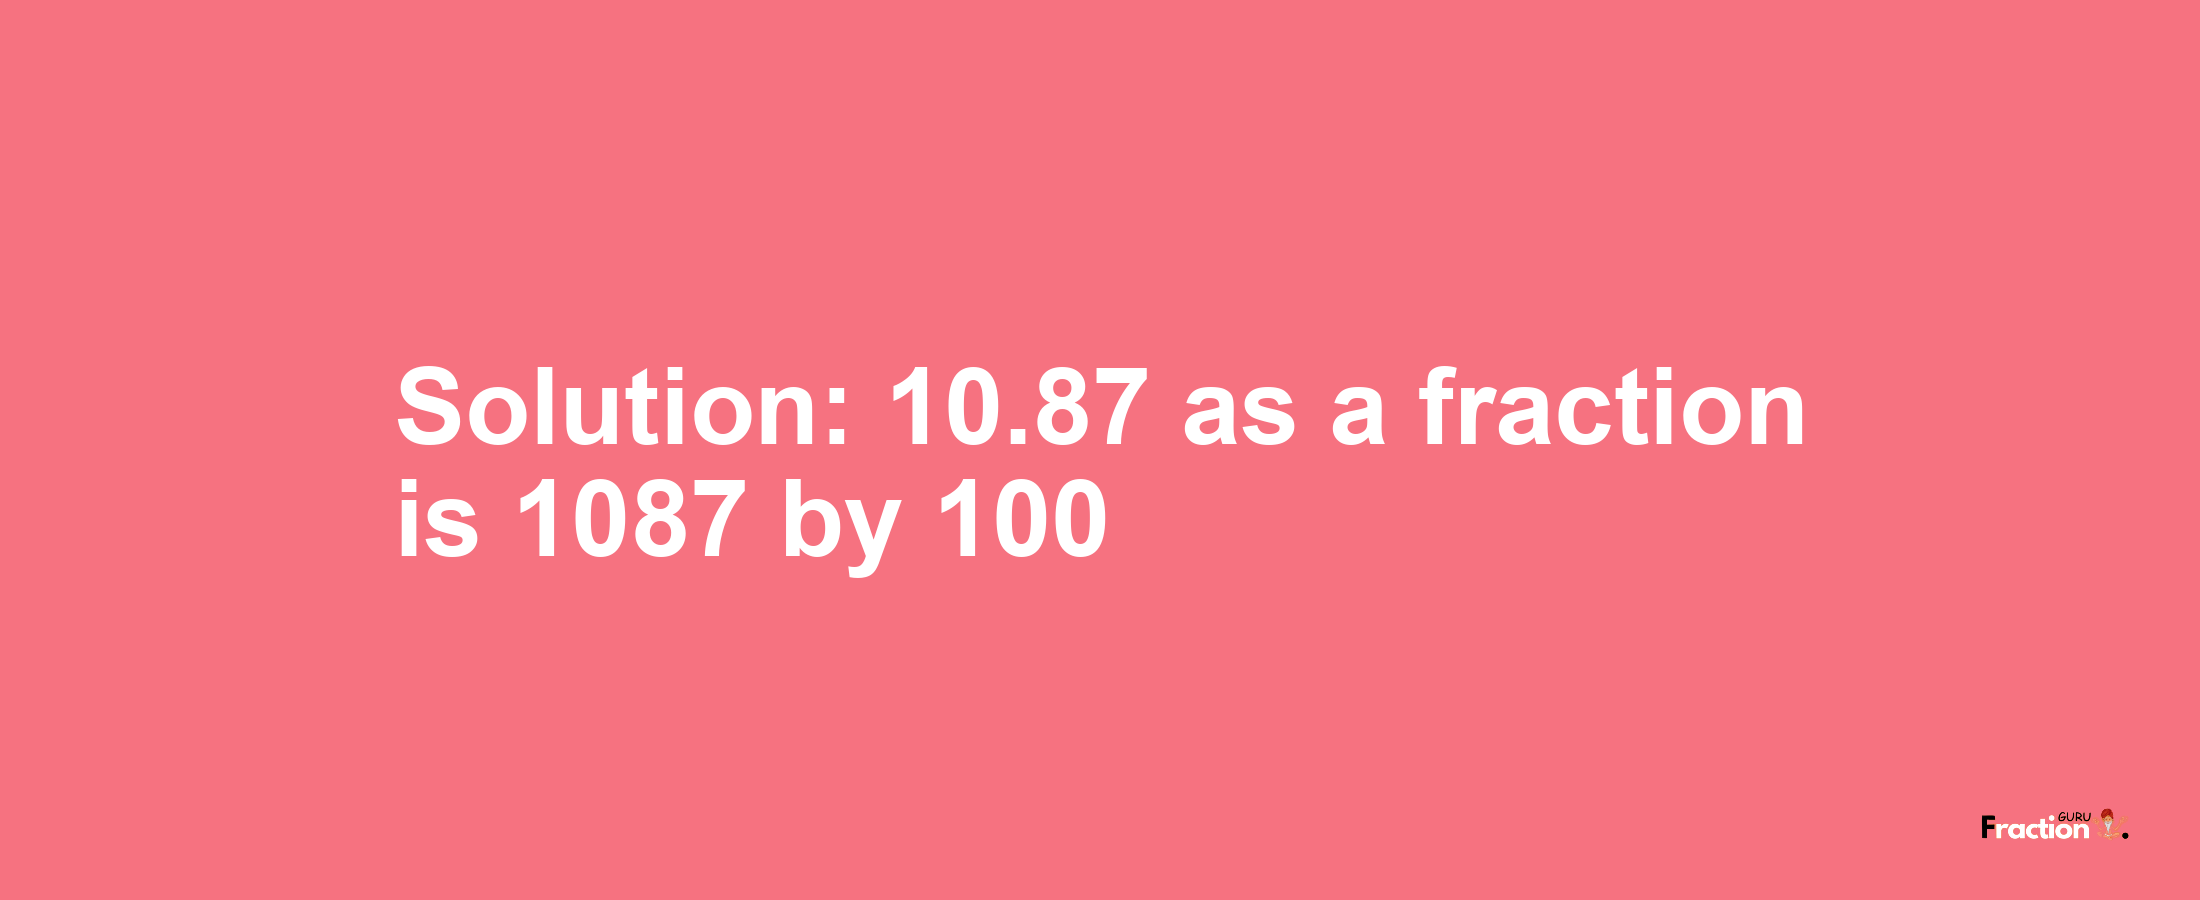 Solution:10.87 as a fraction is 1087/100